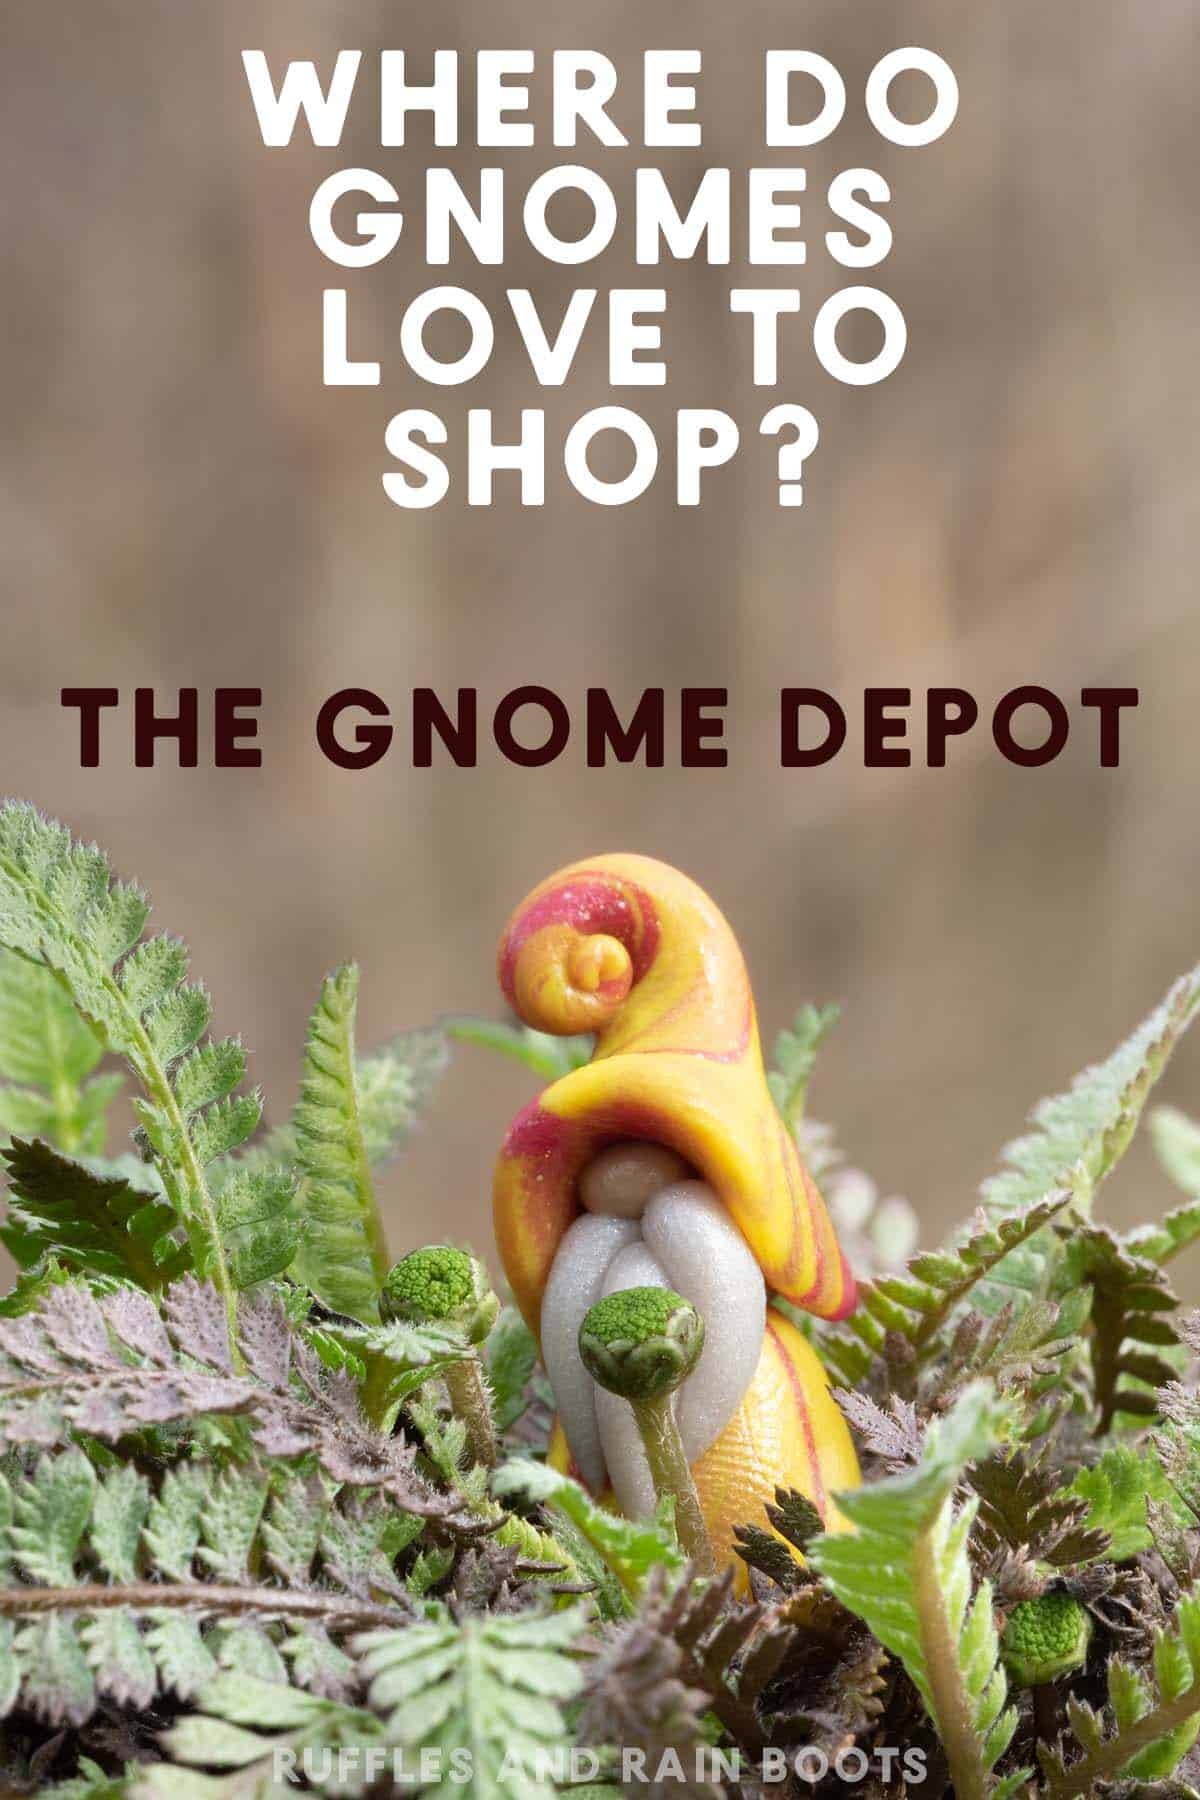 Vertical image of clay gnome on fern with gnome joke text.